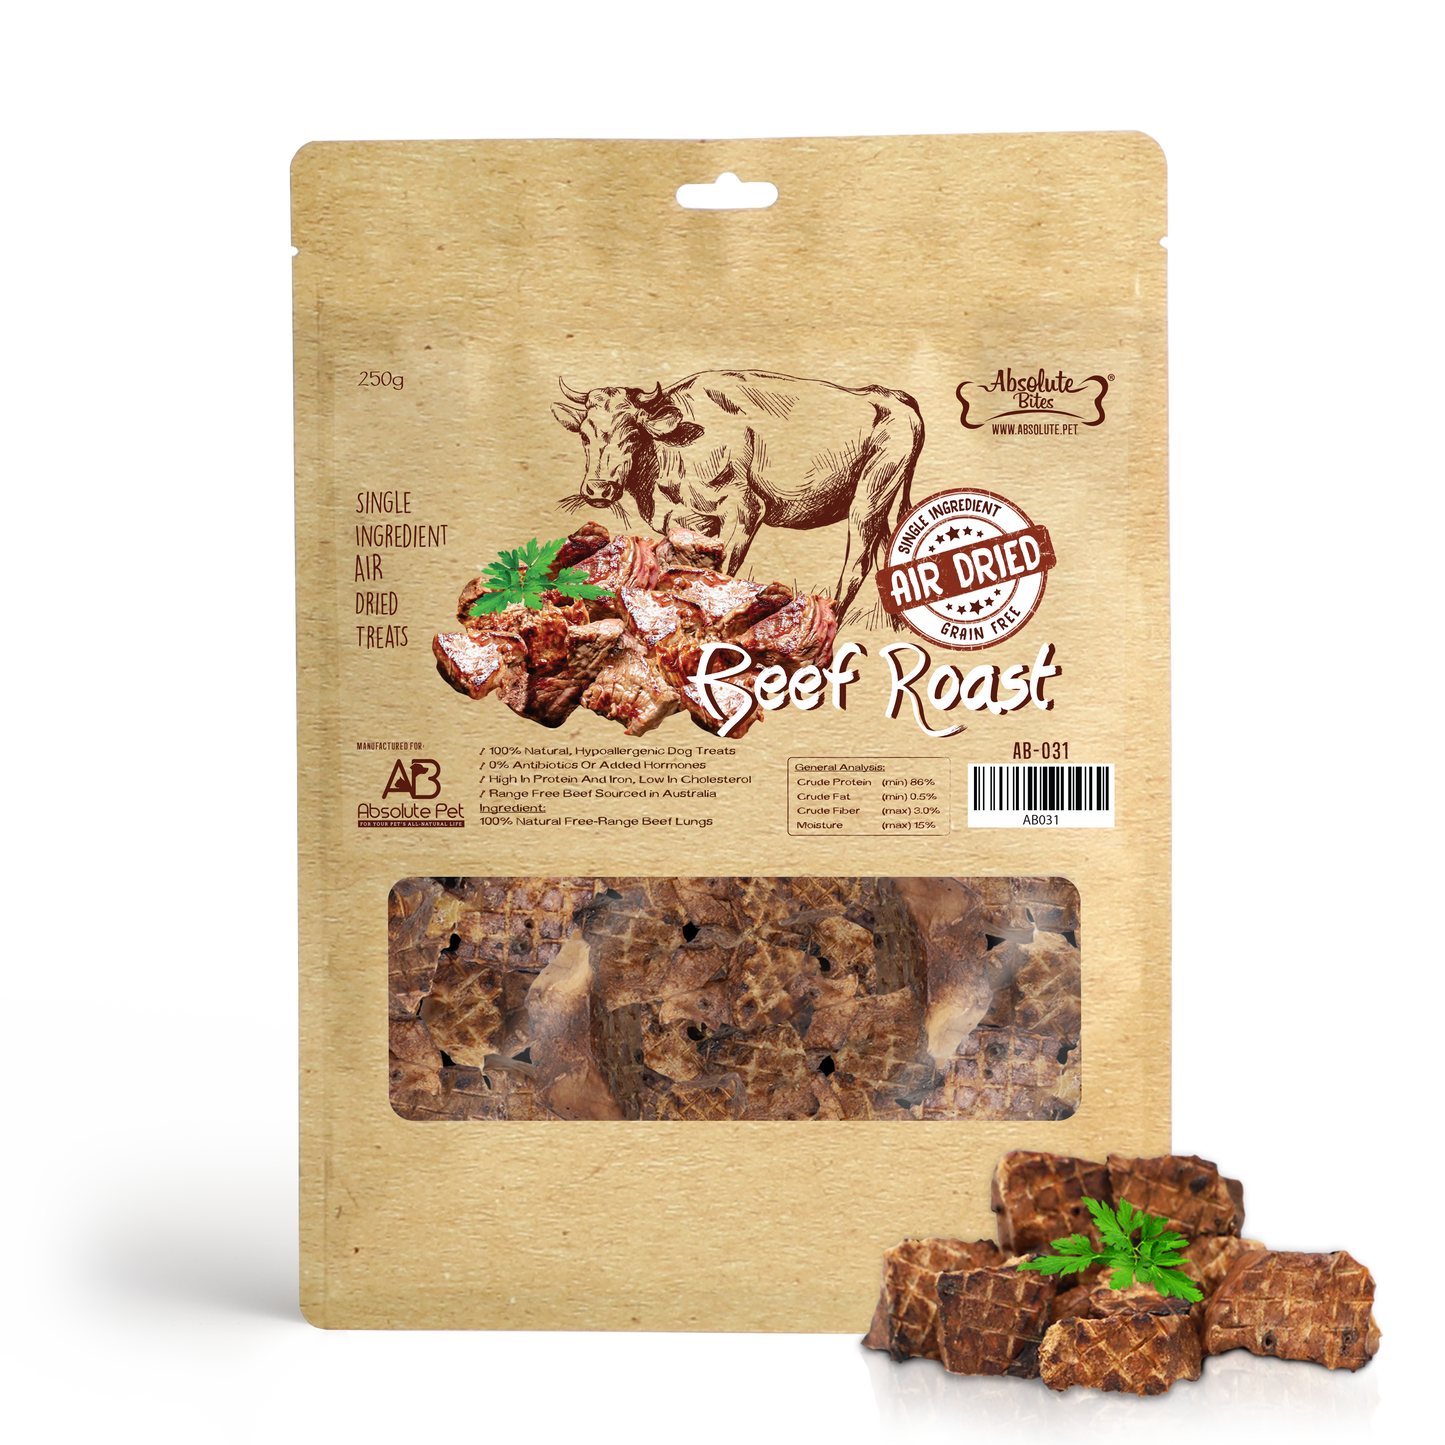 Absolute Bites Air Dried Beef Roast Dog Treats (Large Bag) 250g